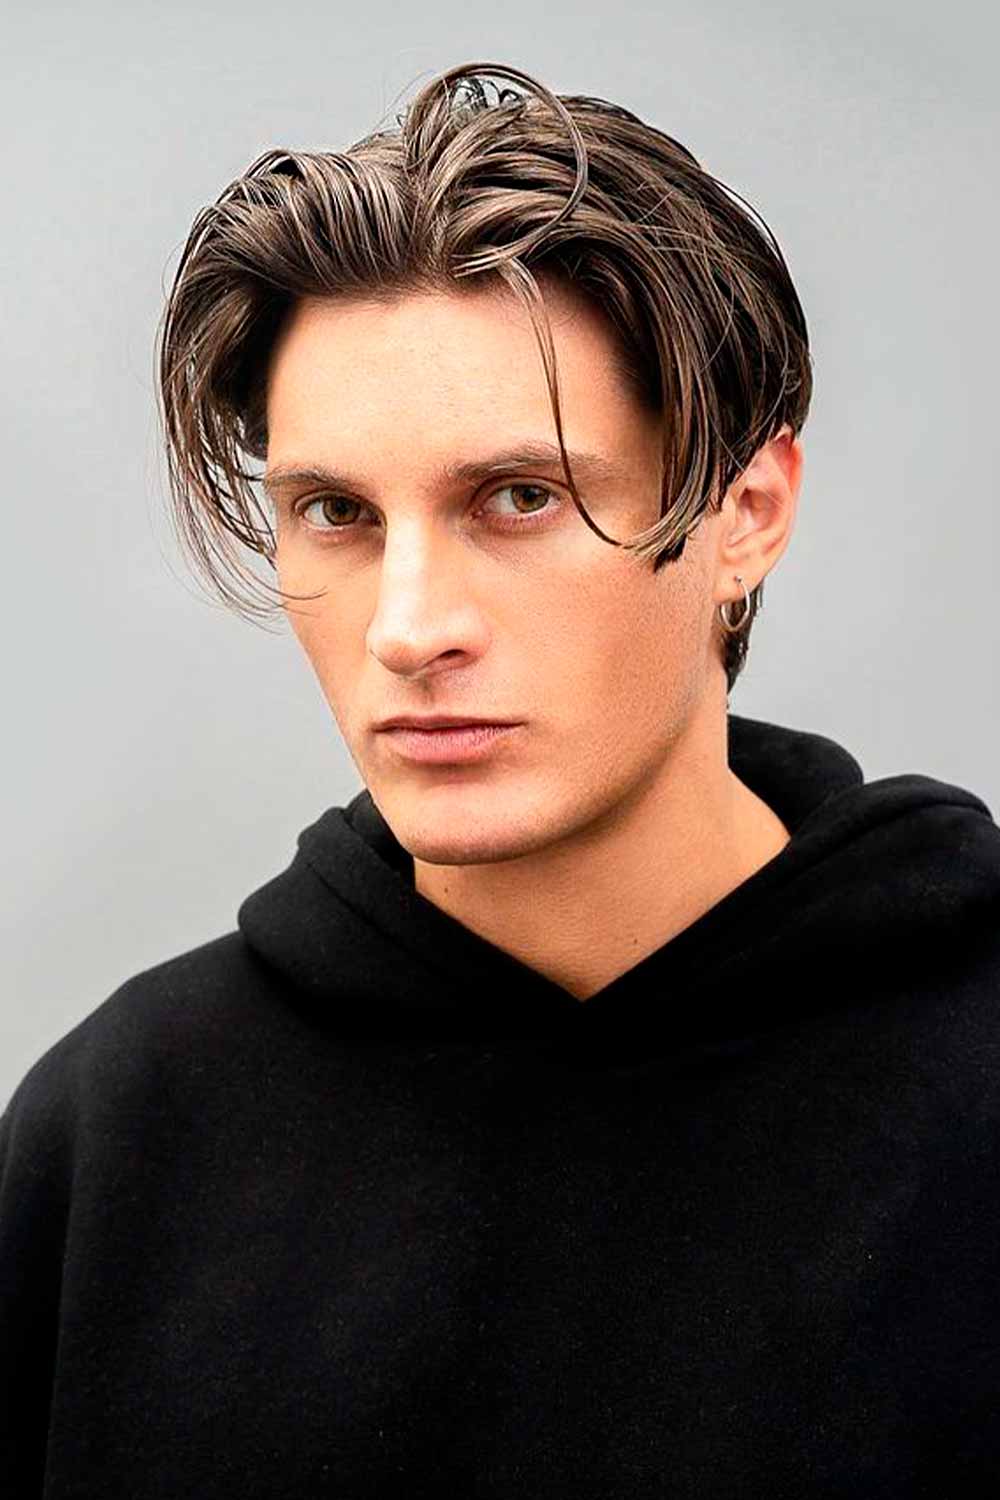 Middle Part Medium Hair #promhairstyles #promhairstylesformen #formalhairstyles #mensformalhairstyles